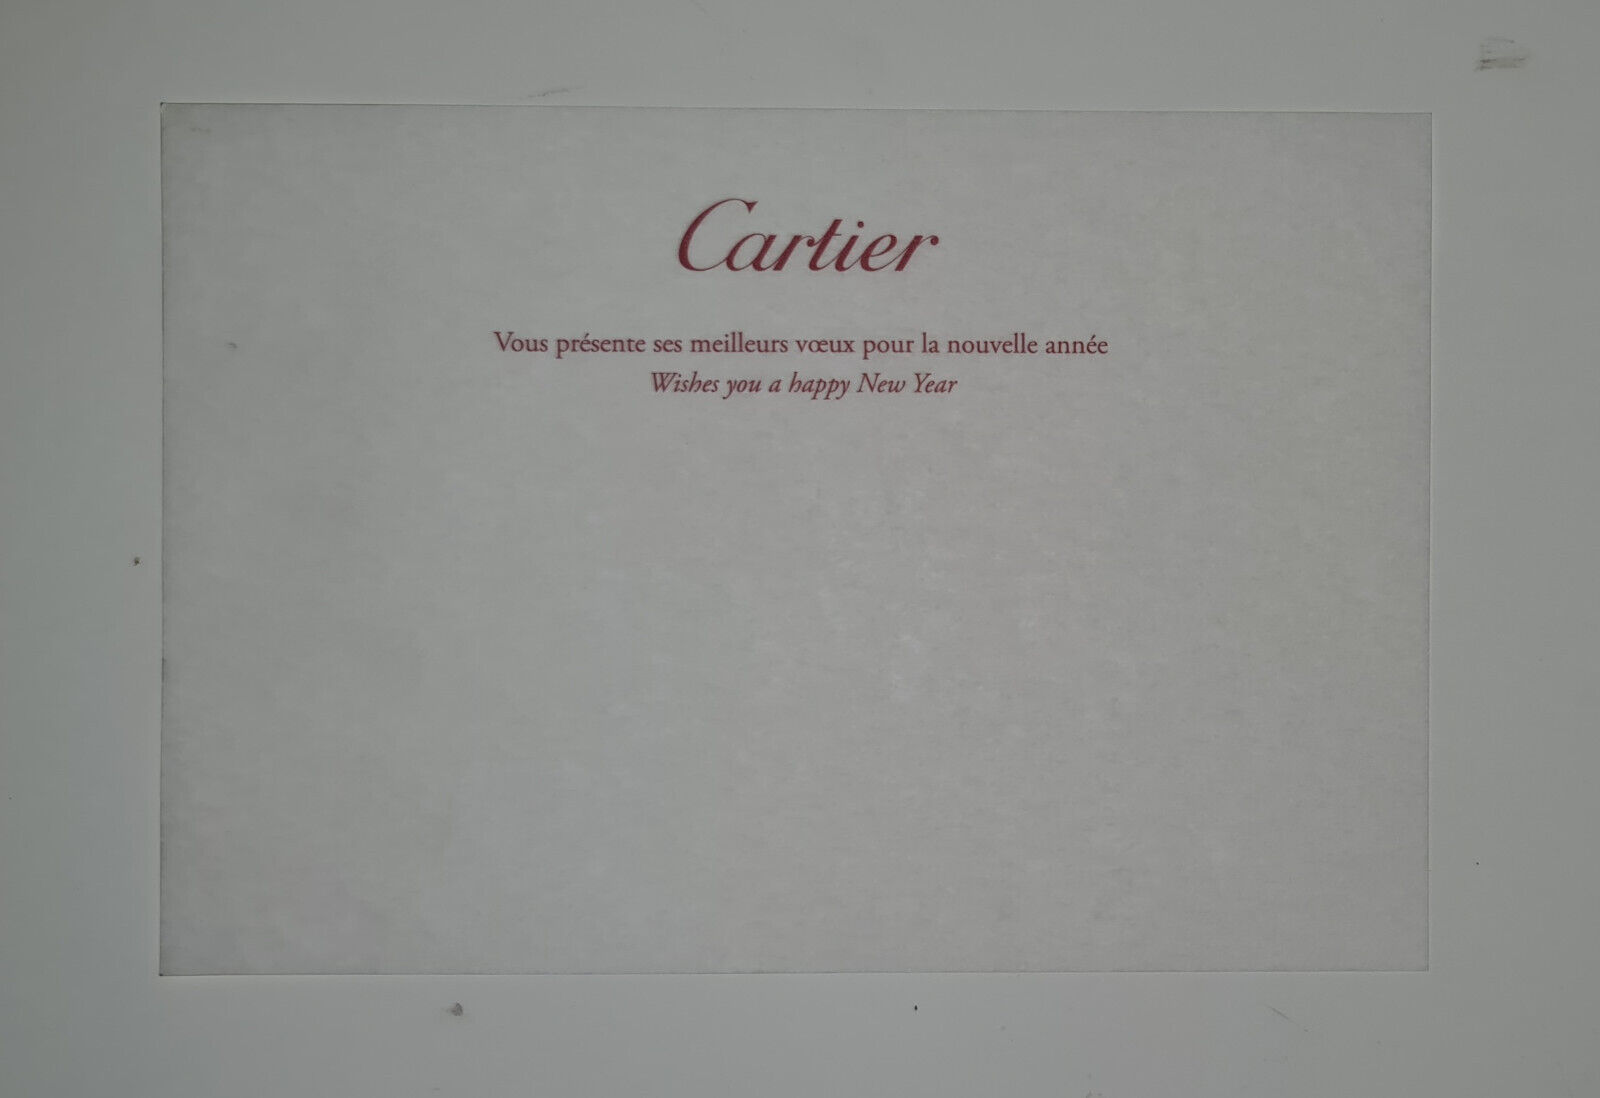 Original CARTIER card for HAPPY NEW YEAR wishes unused 19*13 cm